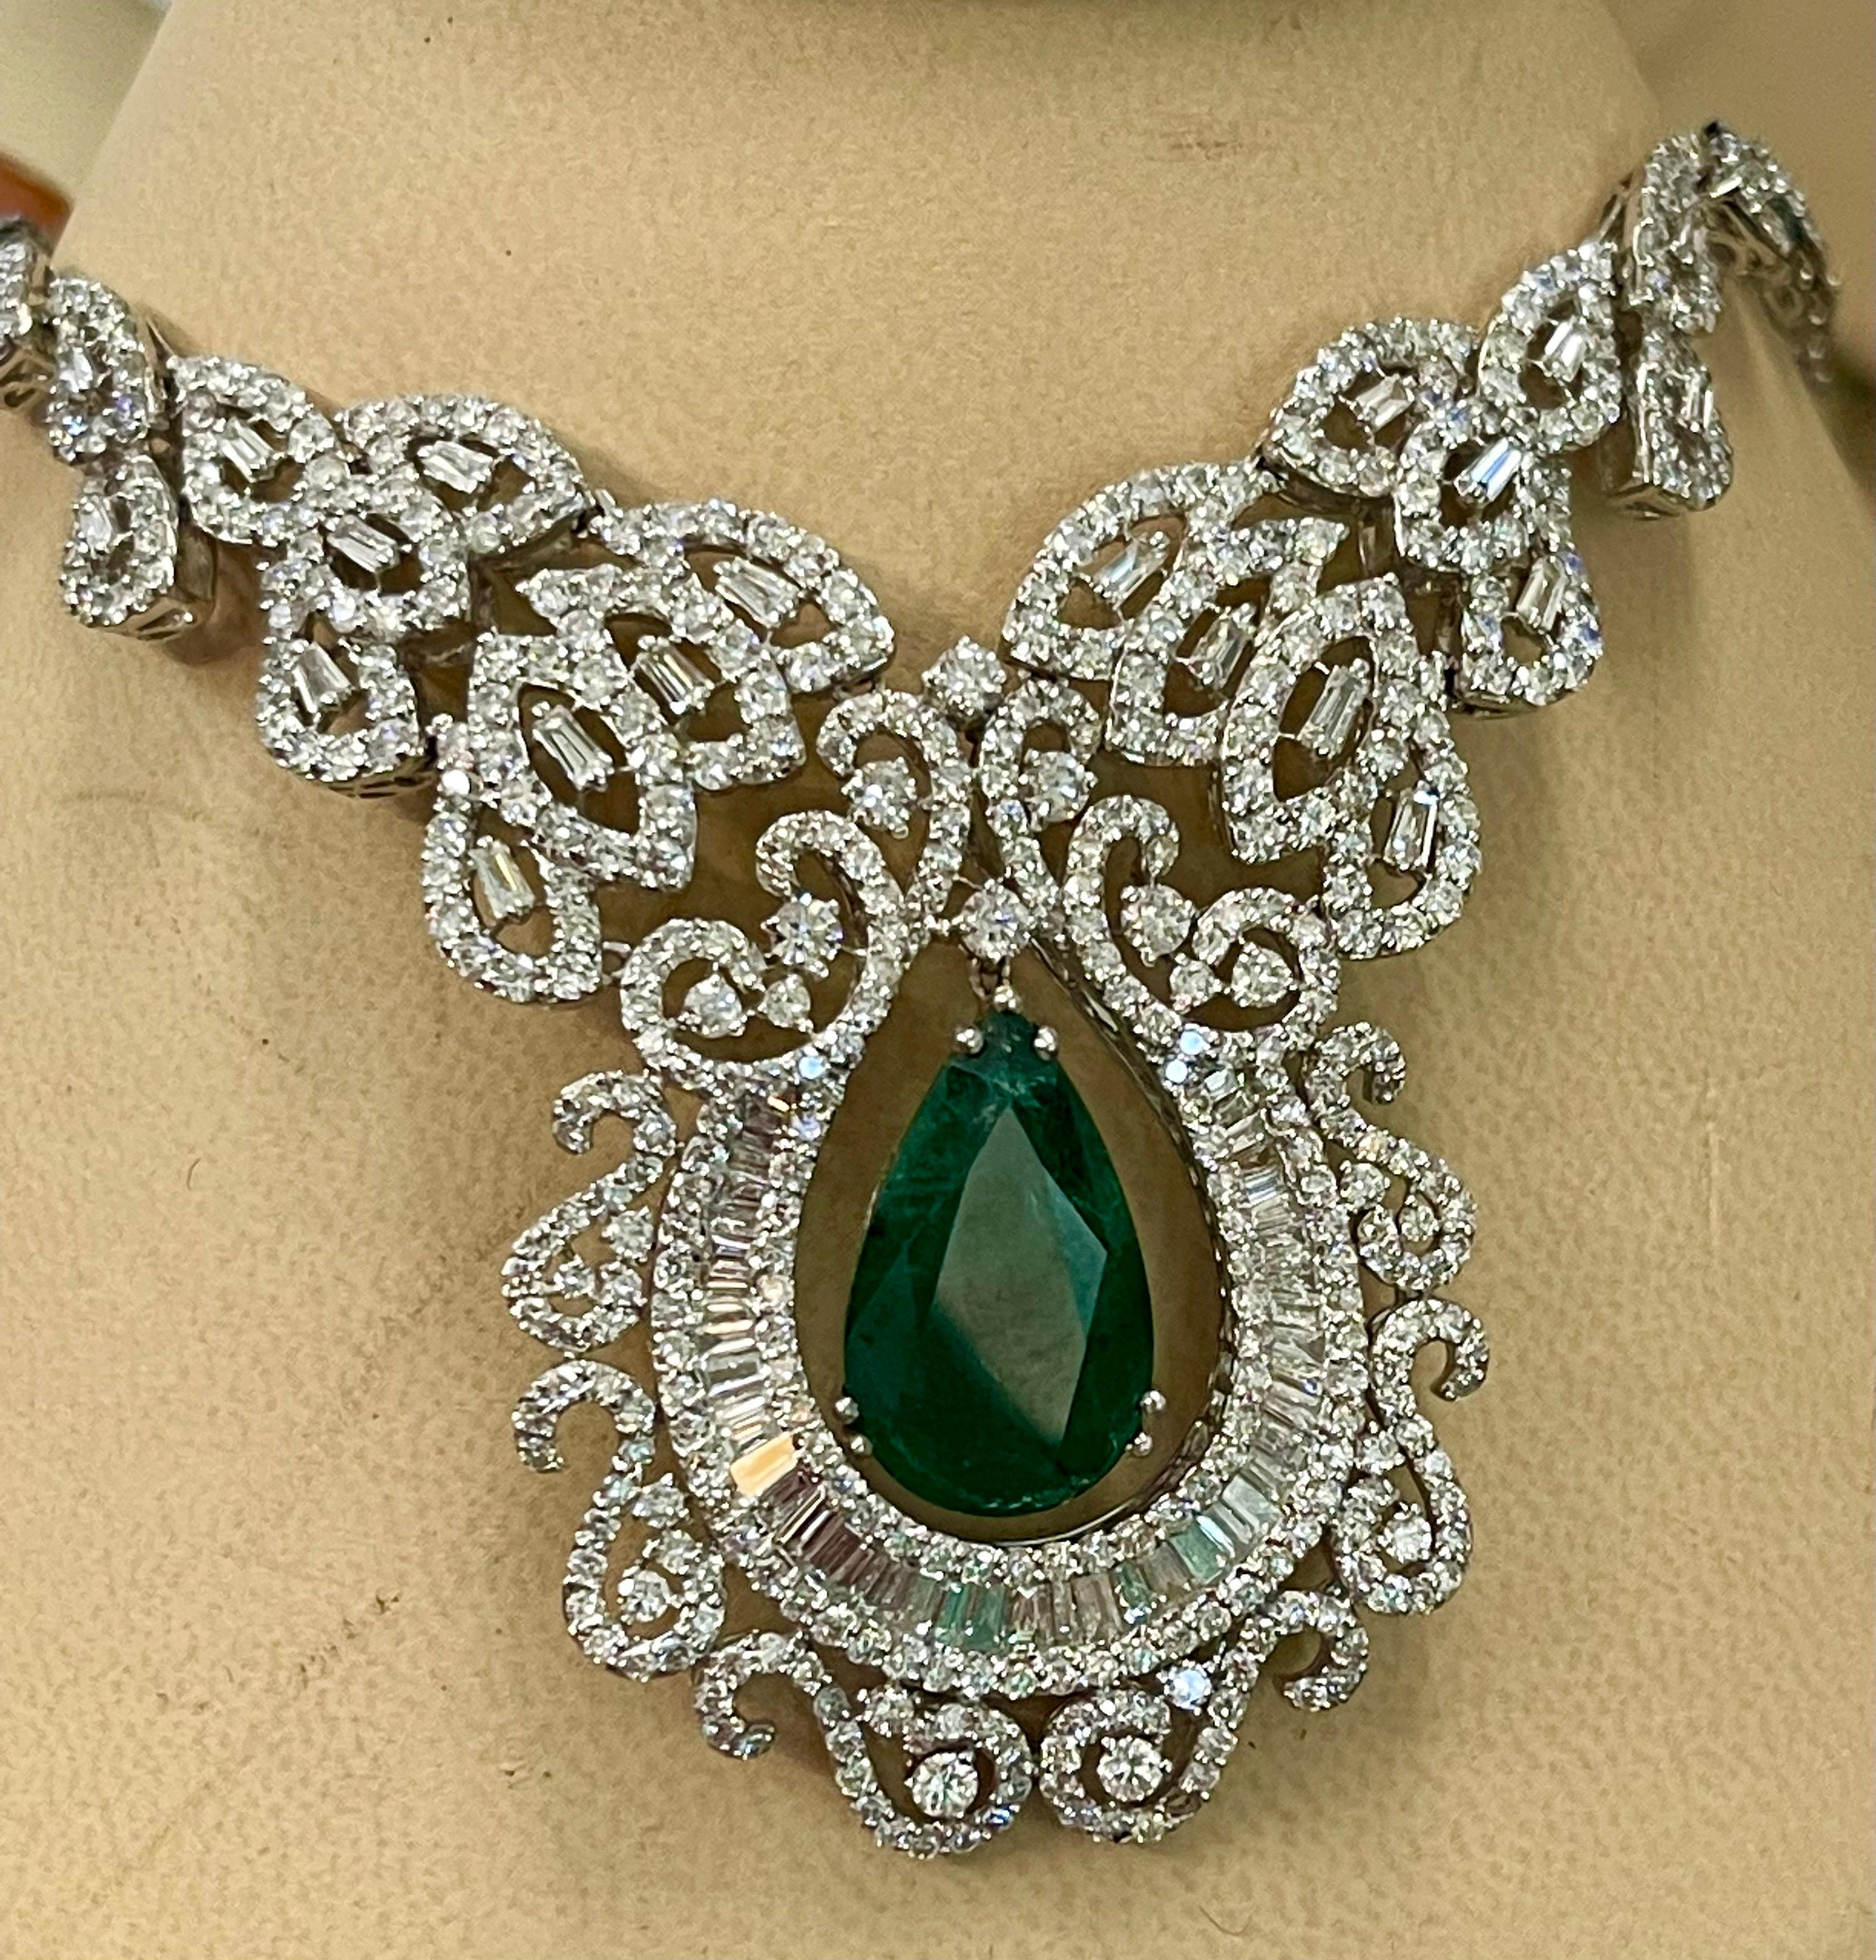 11 Ct Pear Shape Zambian Natural Emerald & 17 Ct Diamond Necklace 18 Karat Gold In Excellent Condition For Sale In New York, NY